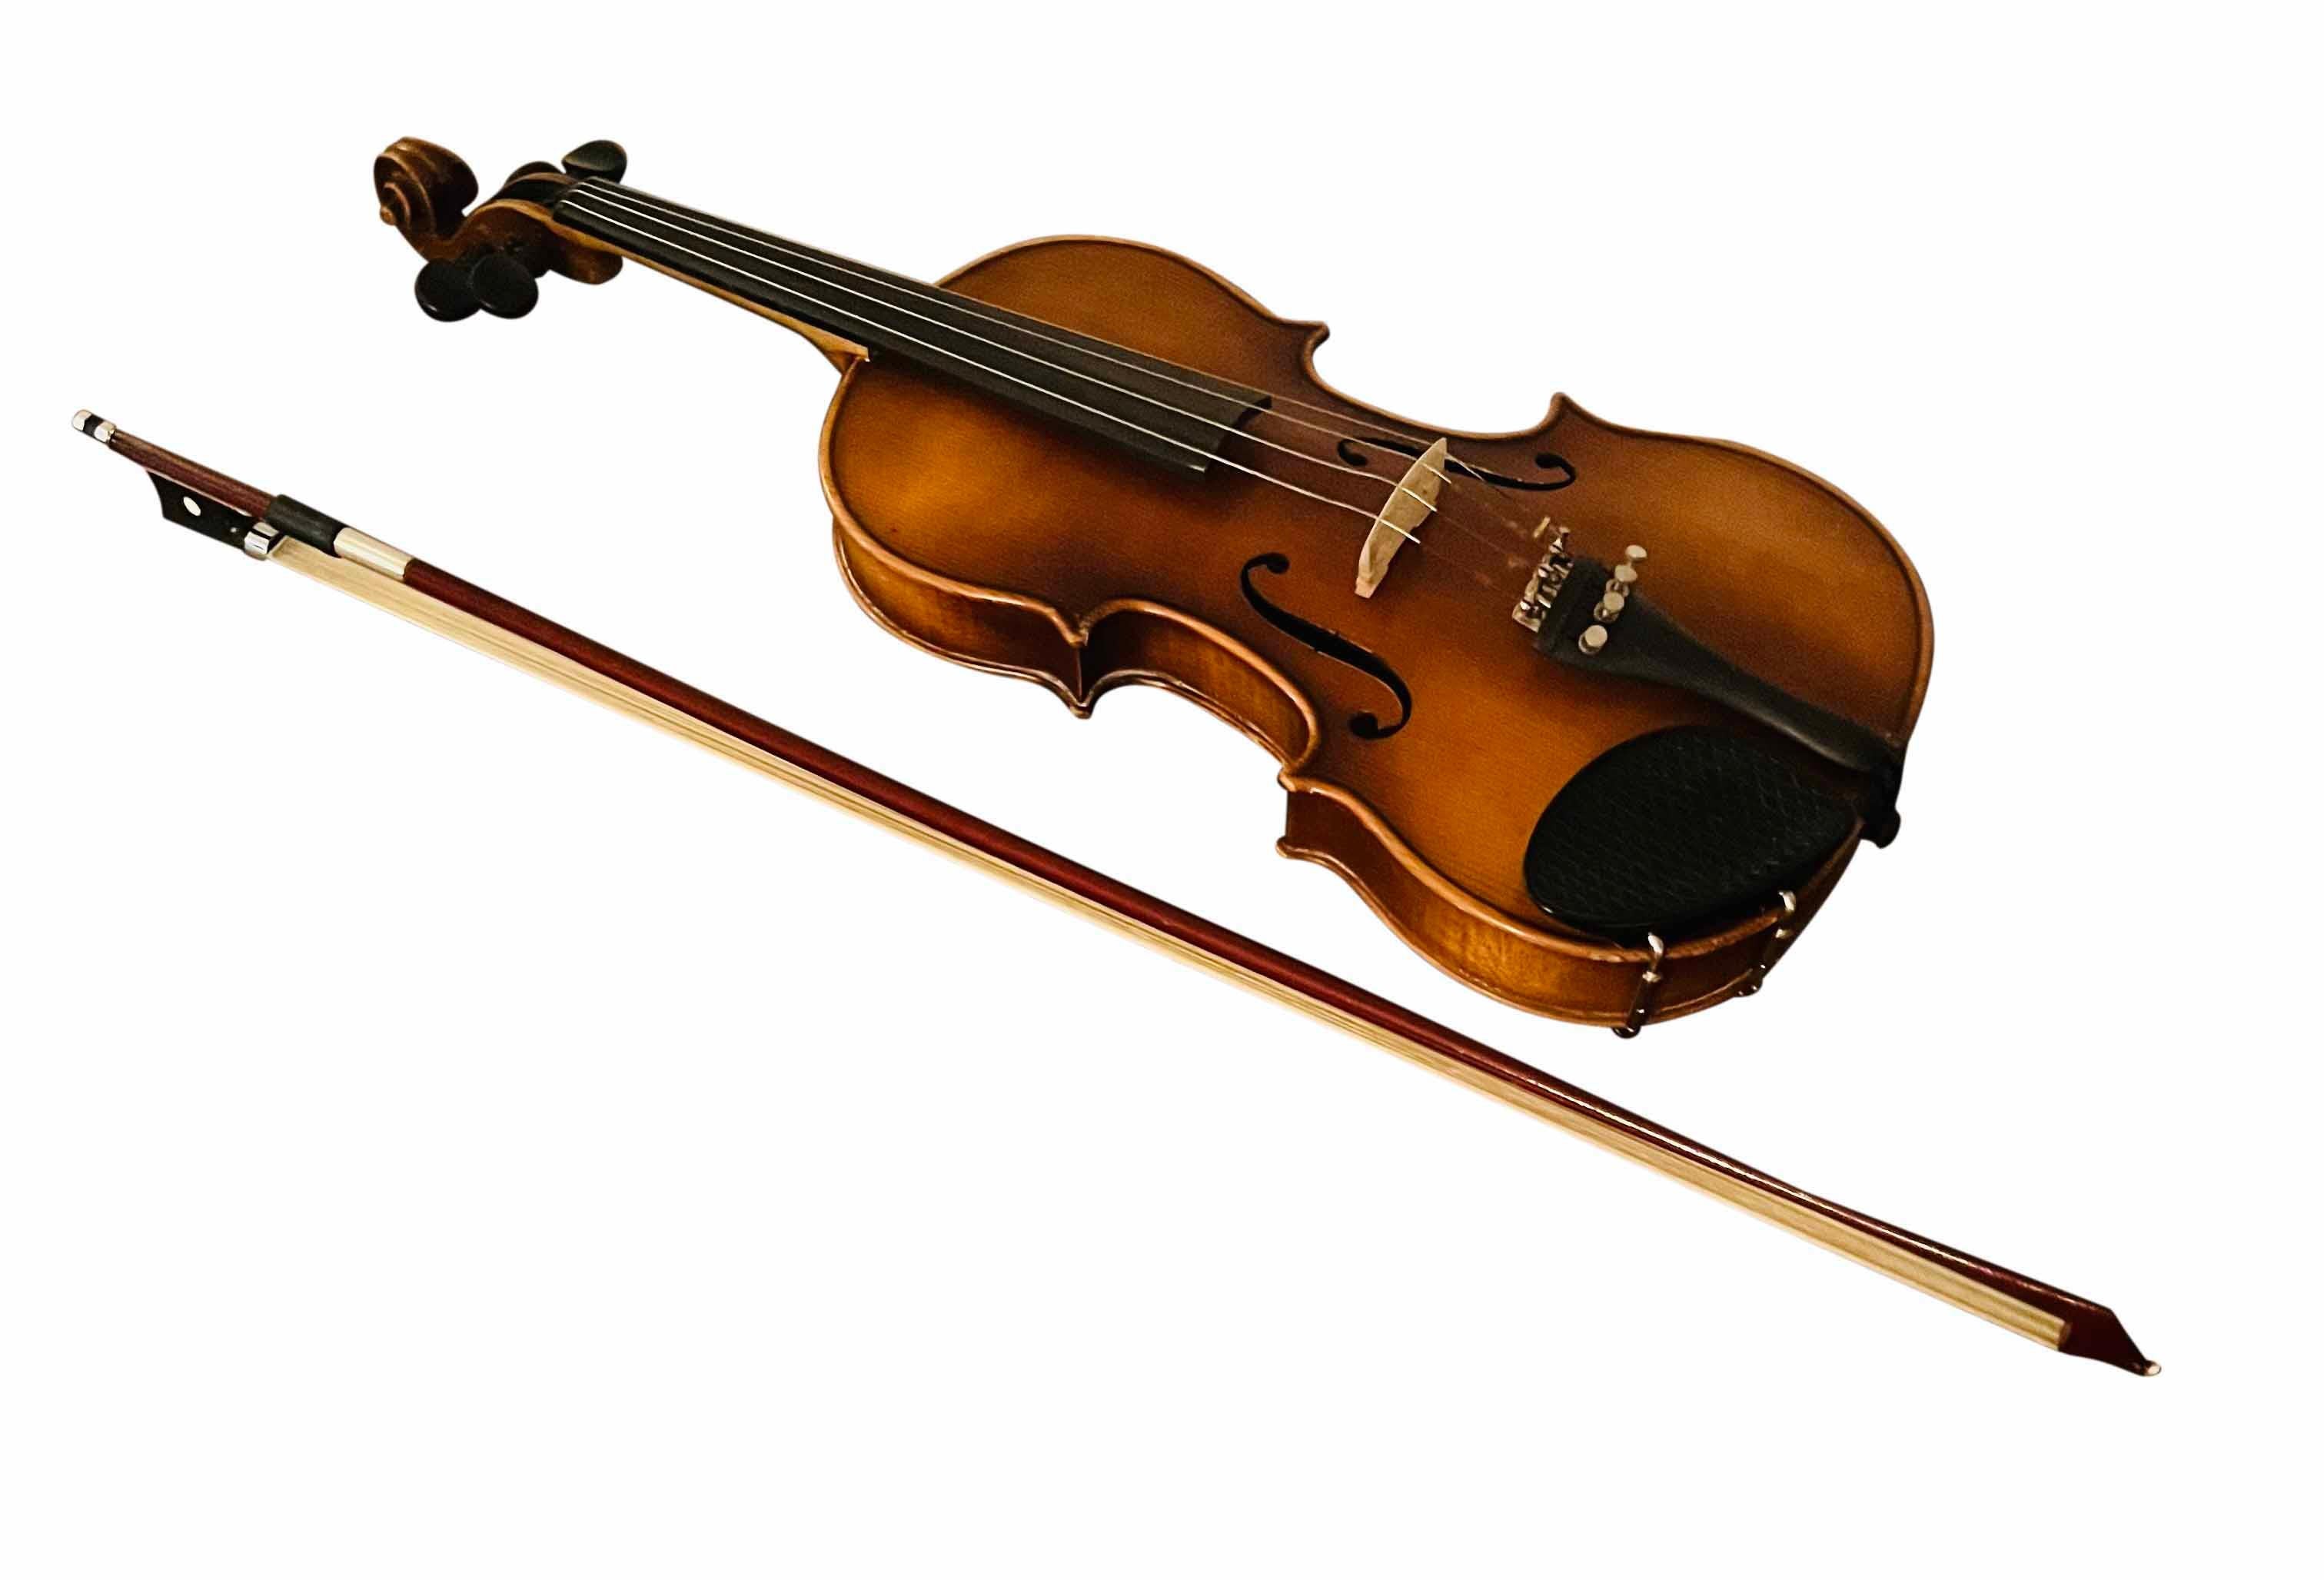 1970 3/4 E.R. Pfretzschner Hand-Crafted Violin in the Style of A. Stradivarius For Sale 10